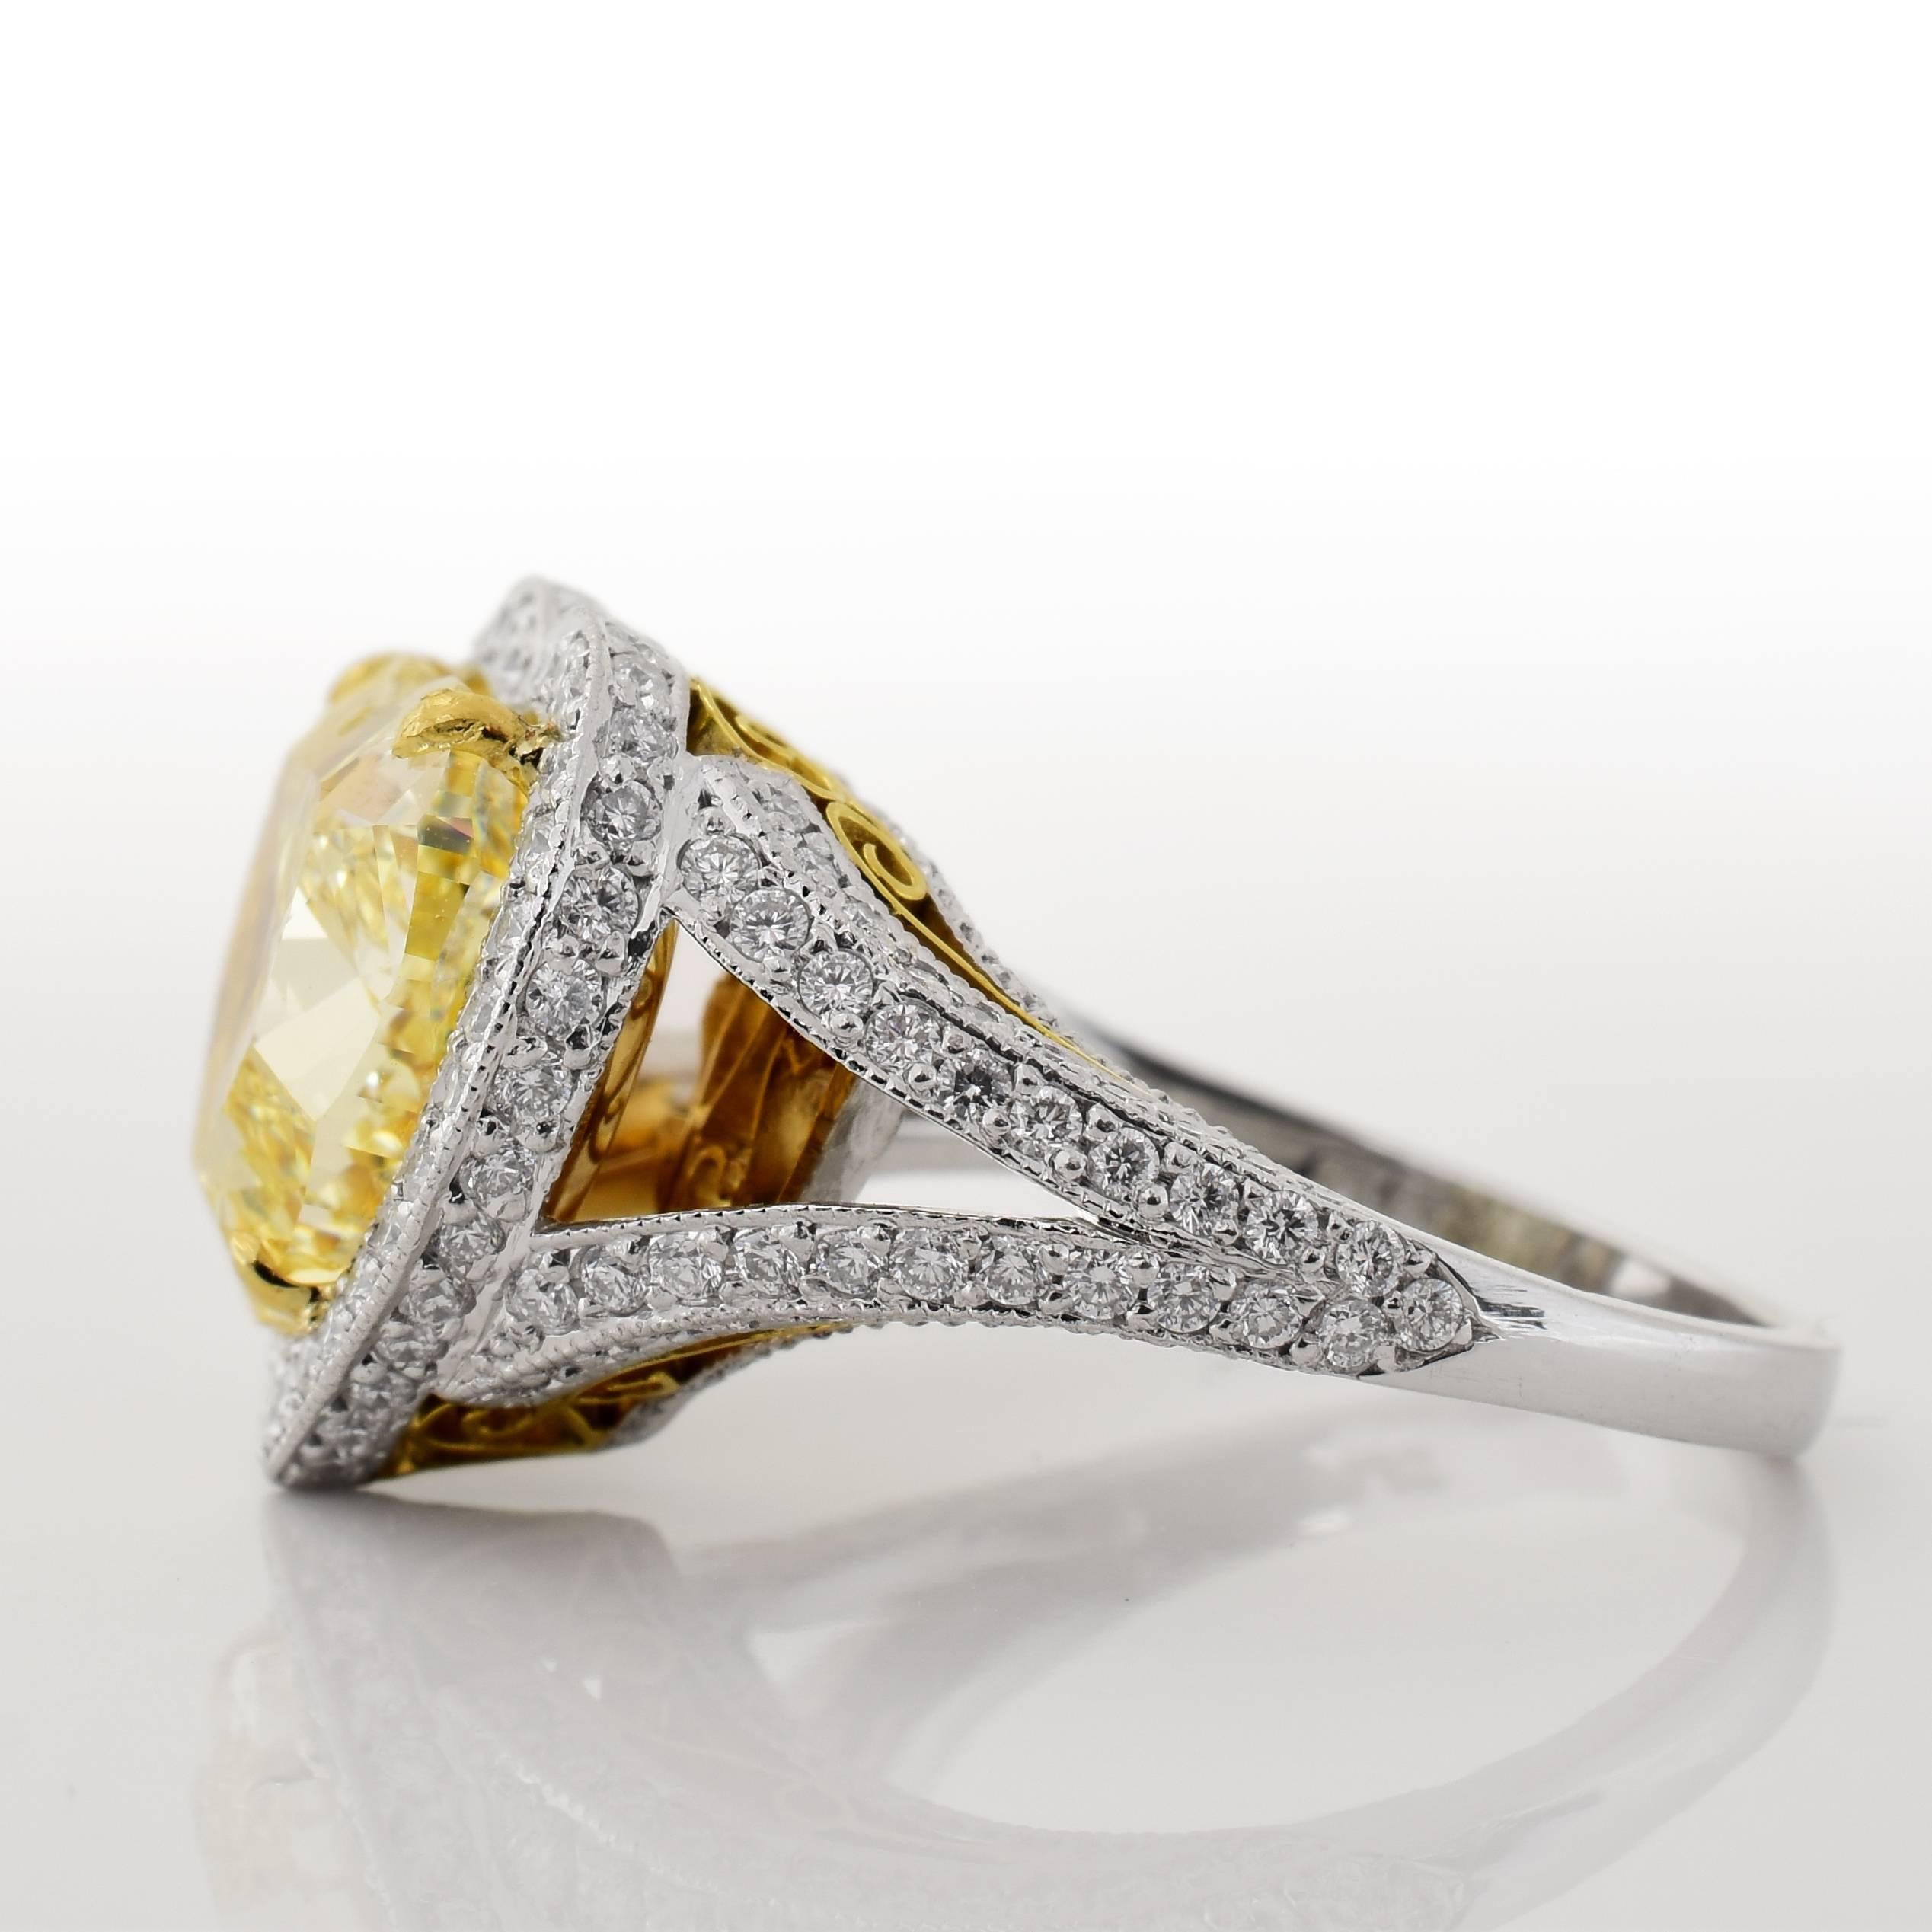 7.12 Carat Fancy Yellow Heart Shaped Diamond Platinum Ring In Excellent Condition For Sale In Los Angeles, CA